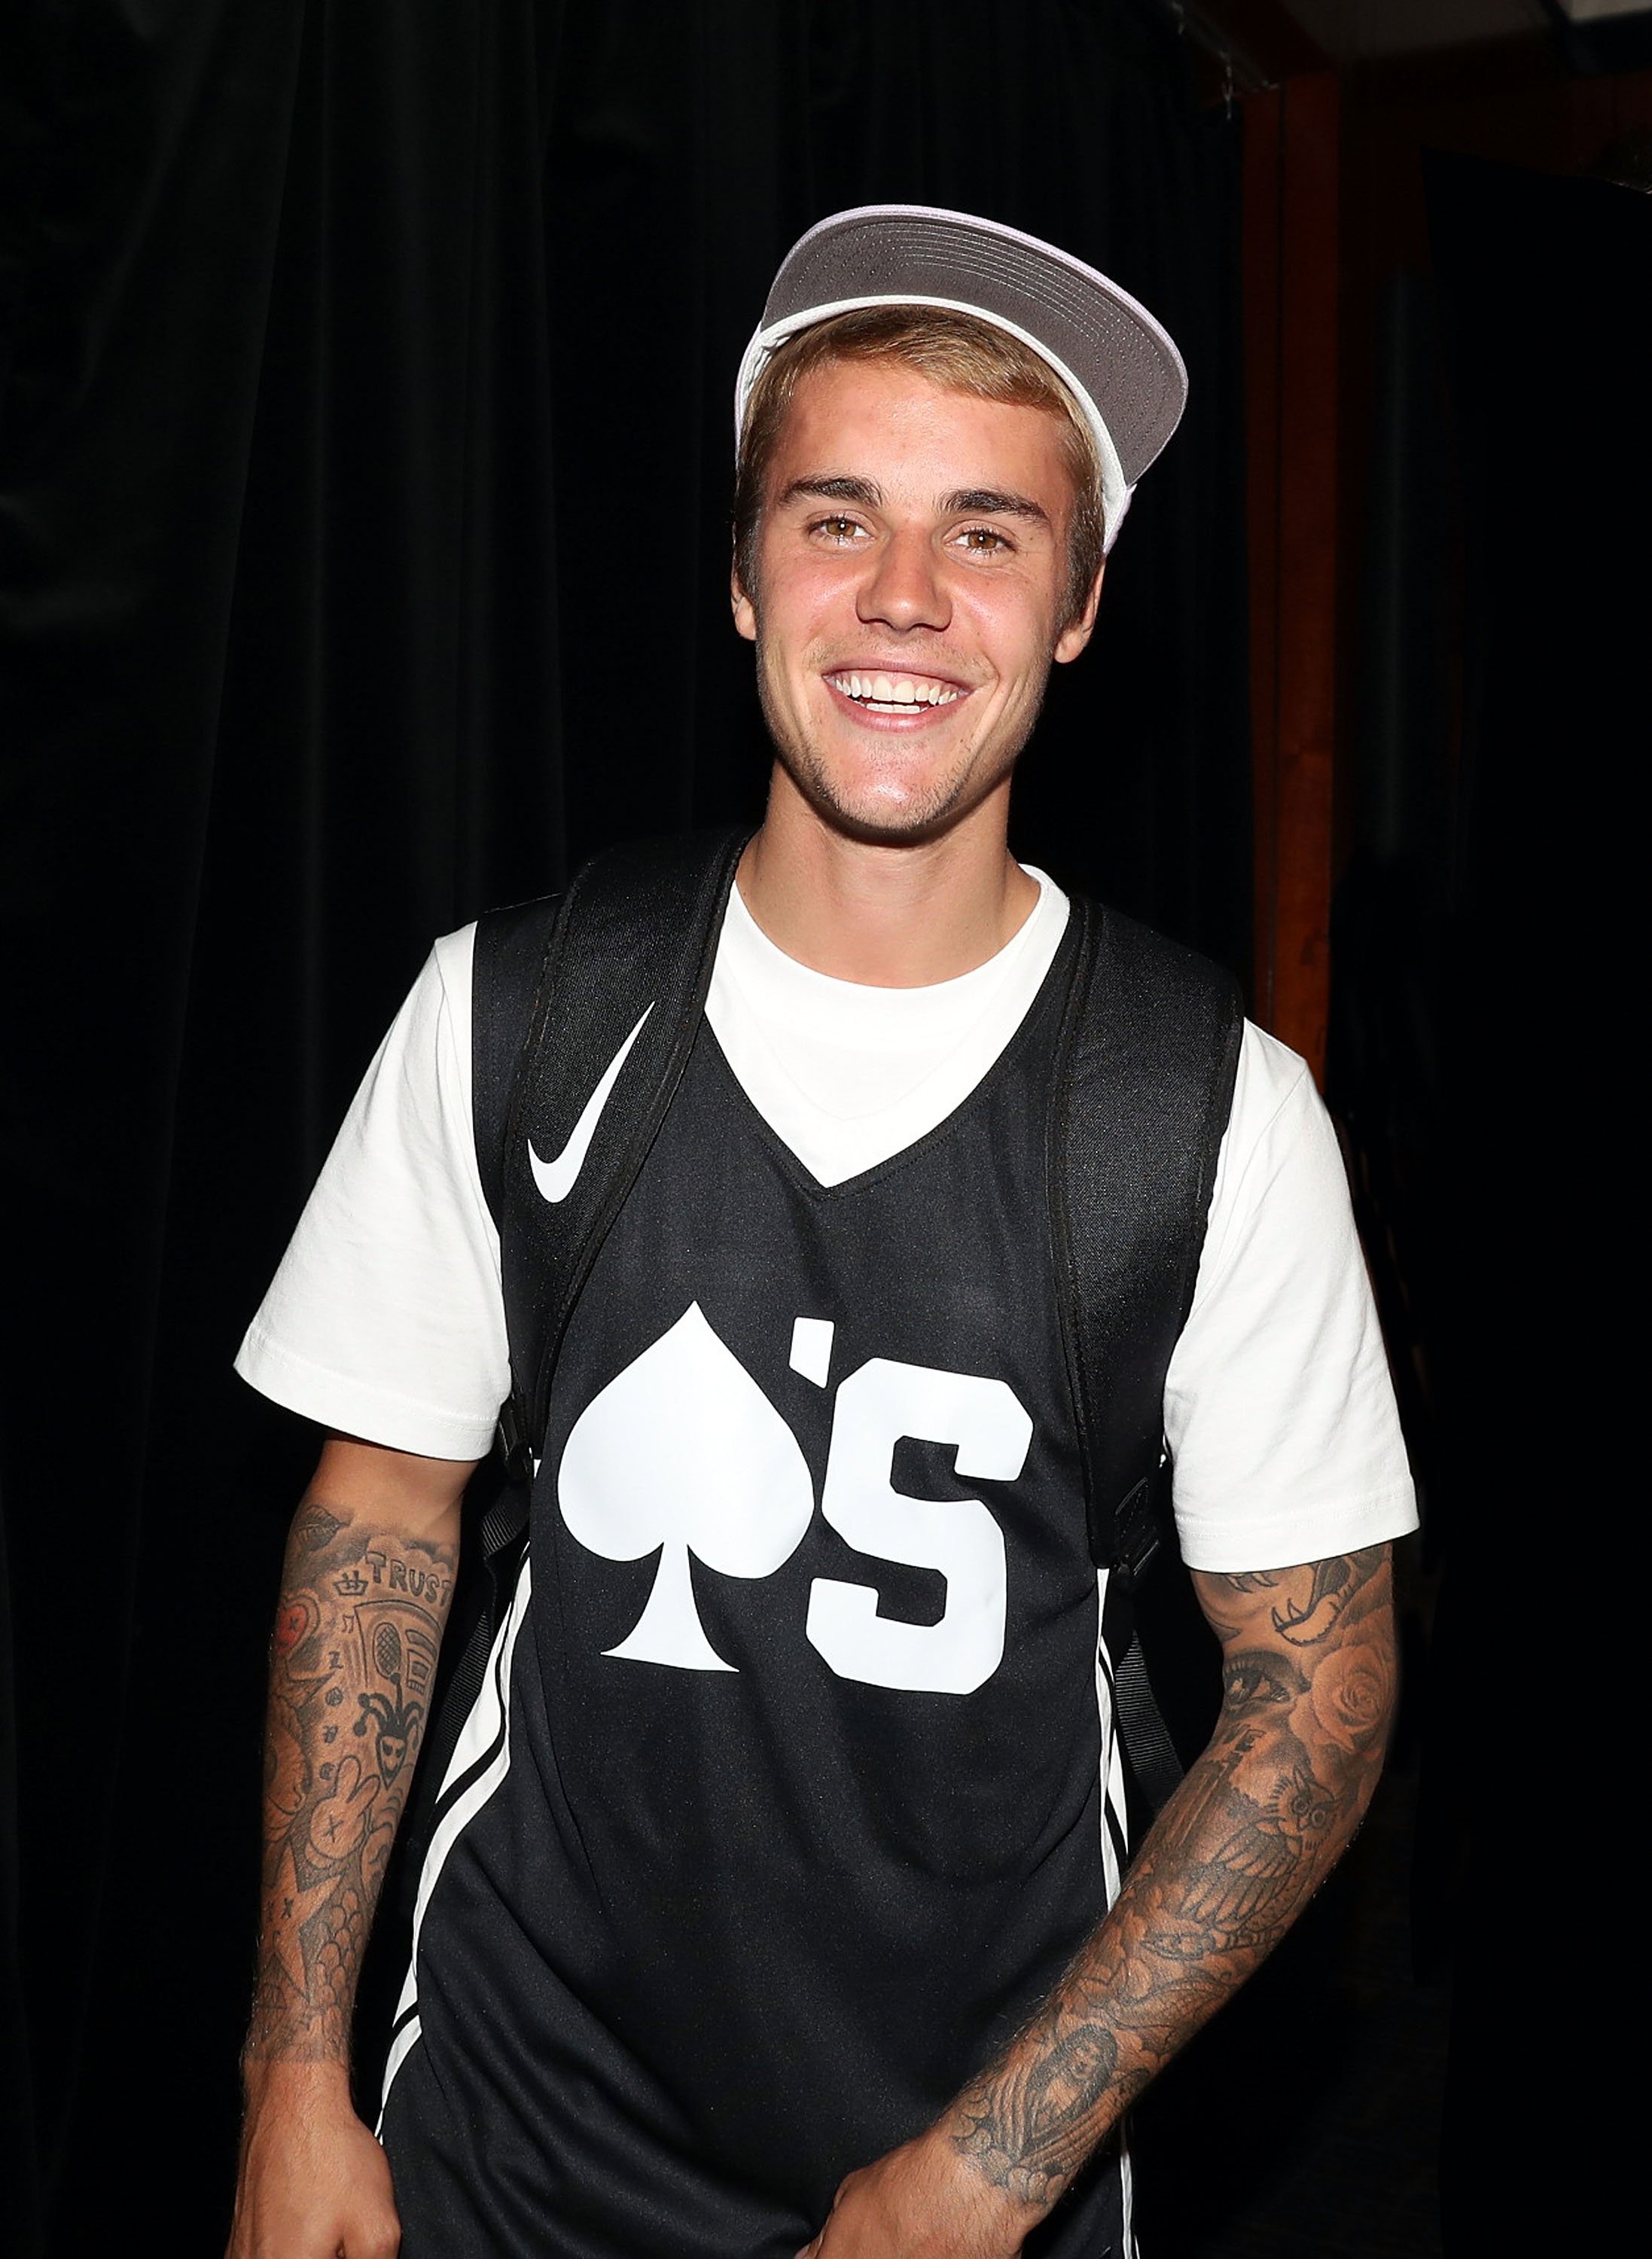 Justin Bieber attends 2017 Aces Charity Celebrity Basketball Game at Madison Square Garden on August 13, 2017 in New York City | Photo: Getty Images